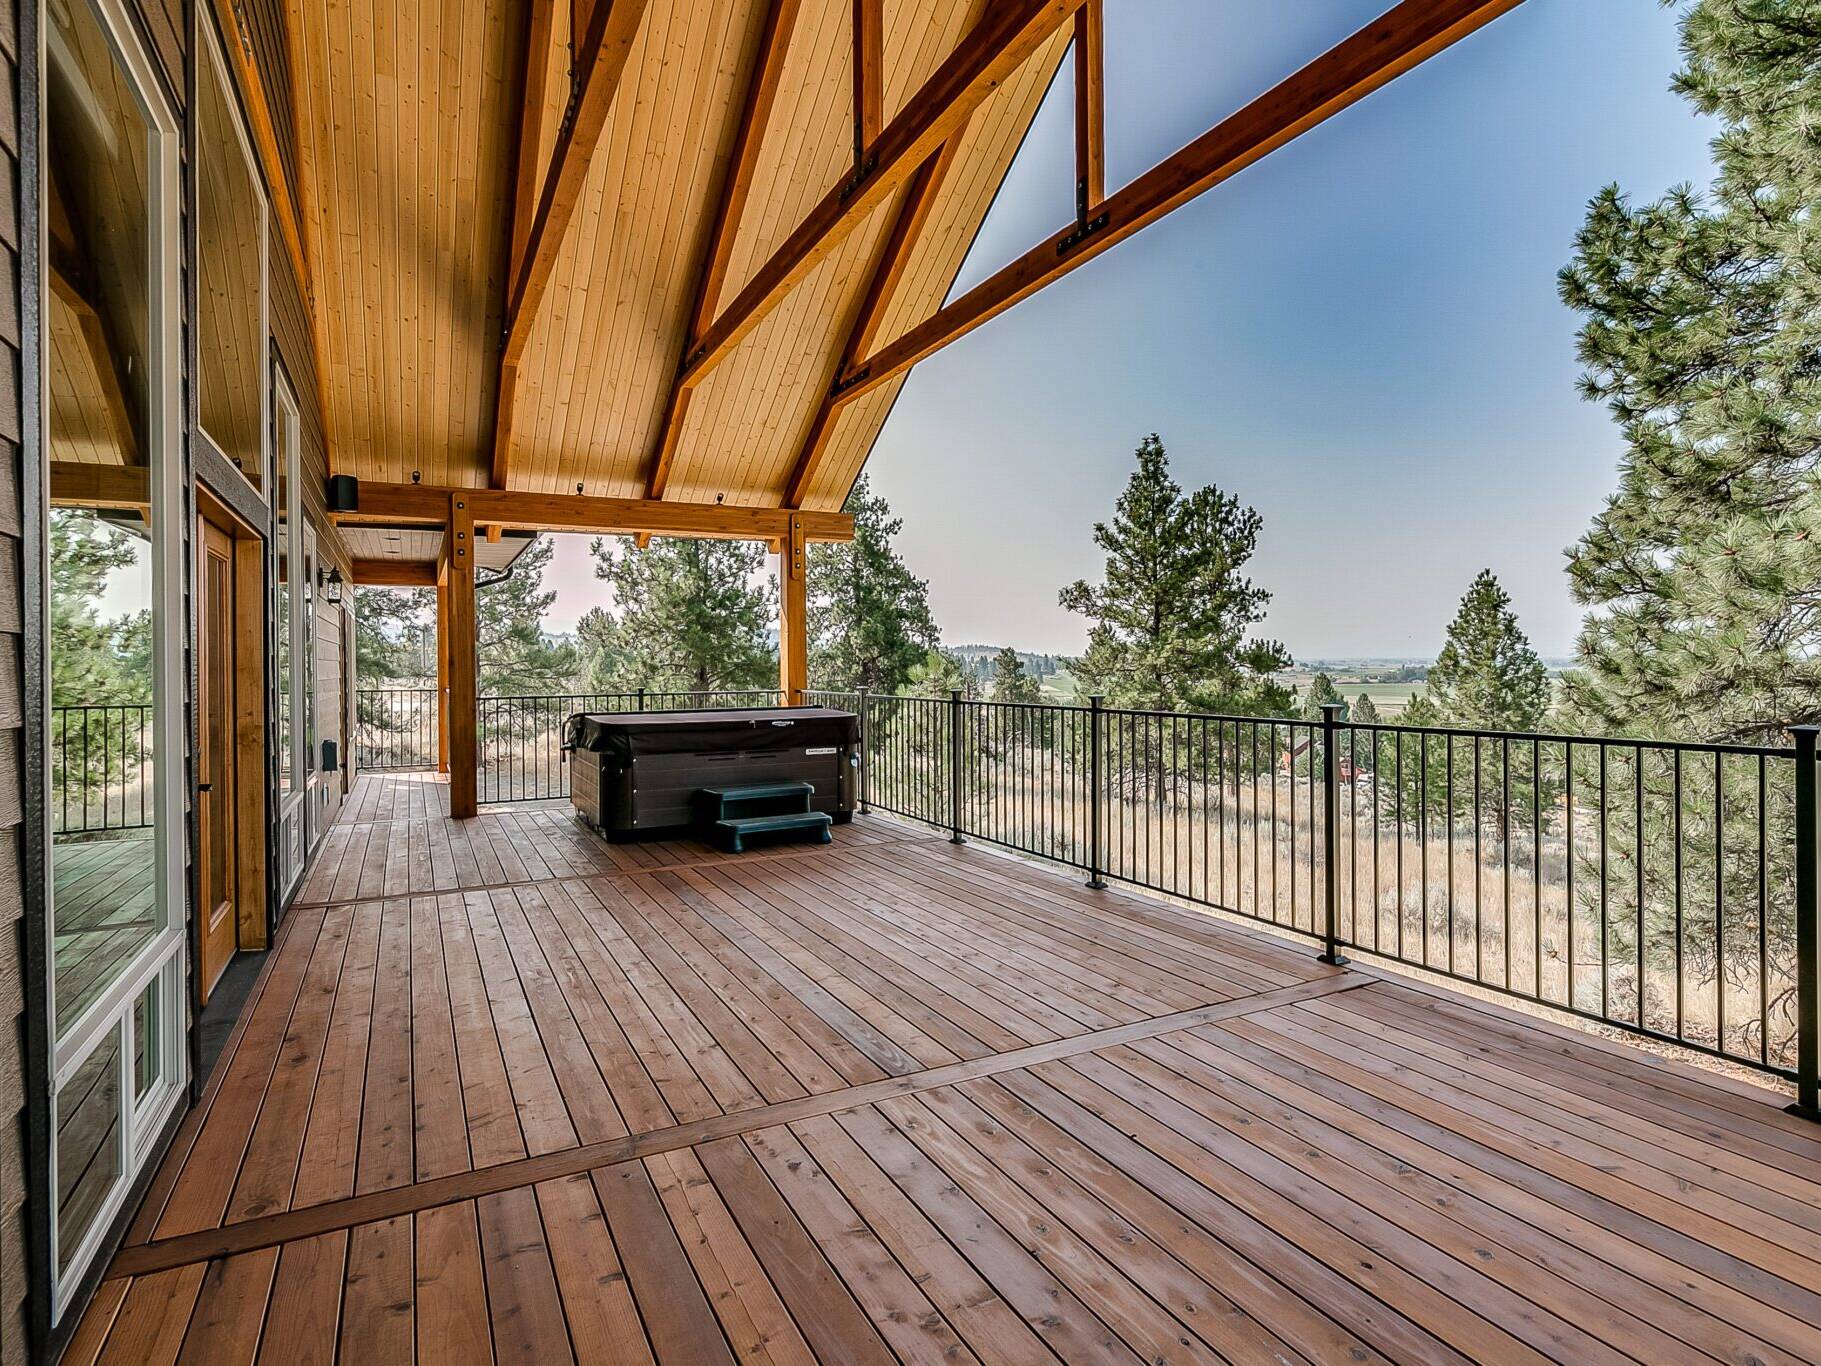 Covered redwood deck with timber trusses at a custom home built by Big Sky Builders near Stevensville, Montana